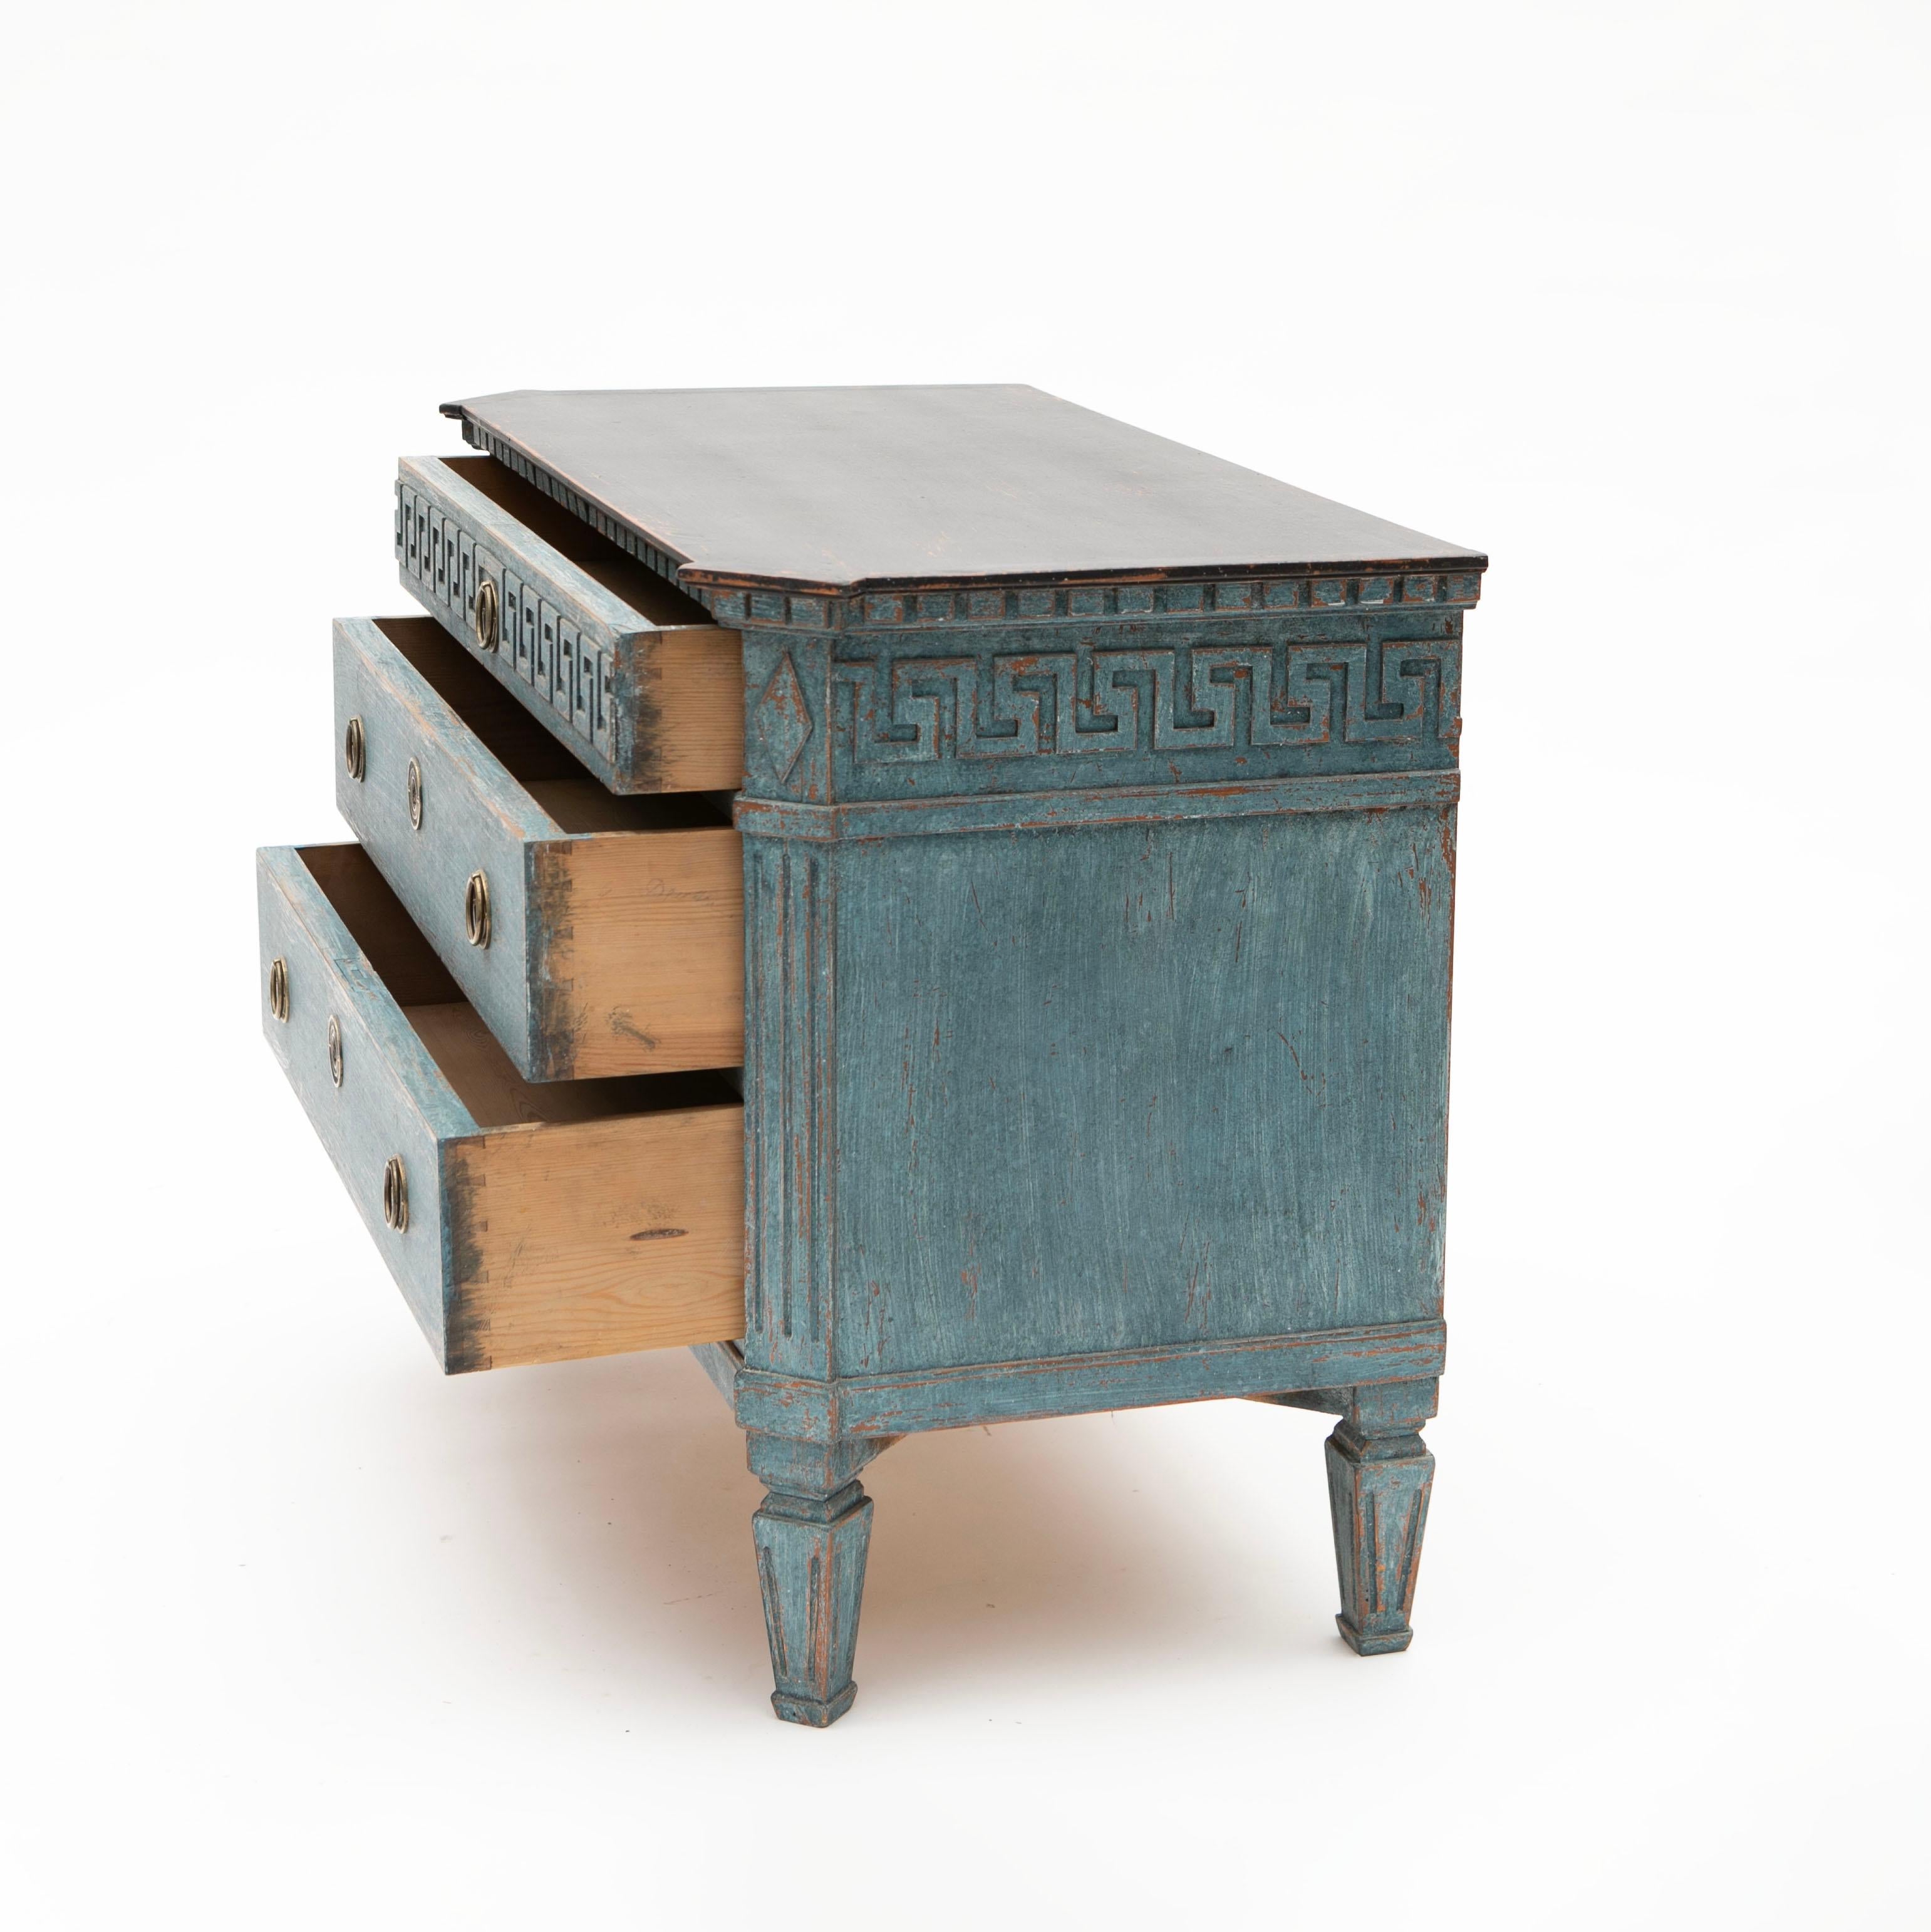 A pair of antique Swedish Gustavian style blue painted chest of three drawers, dating from the 19th century.
Each chest features a black painted rectangular top with canted corners in the front, sitting above a delicate meander décor molding running